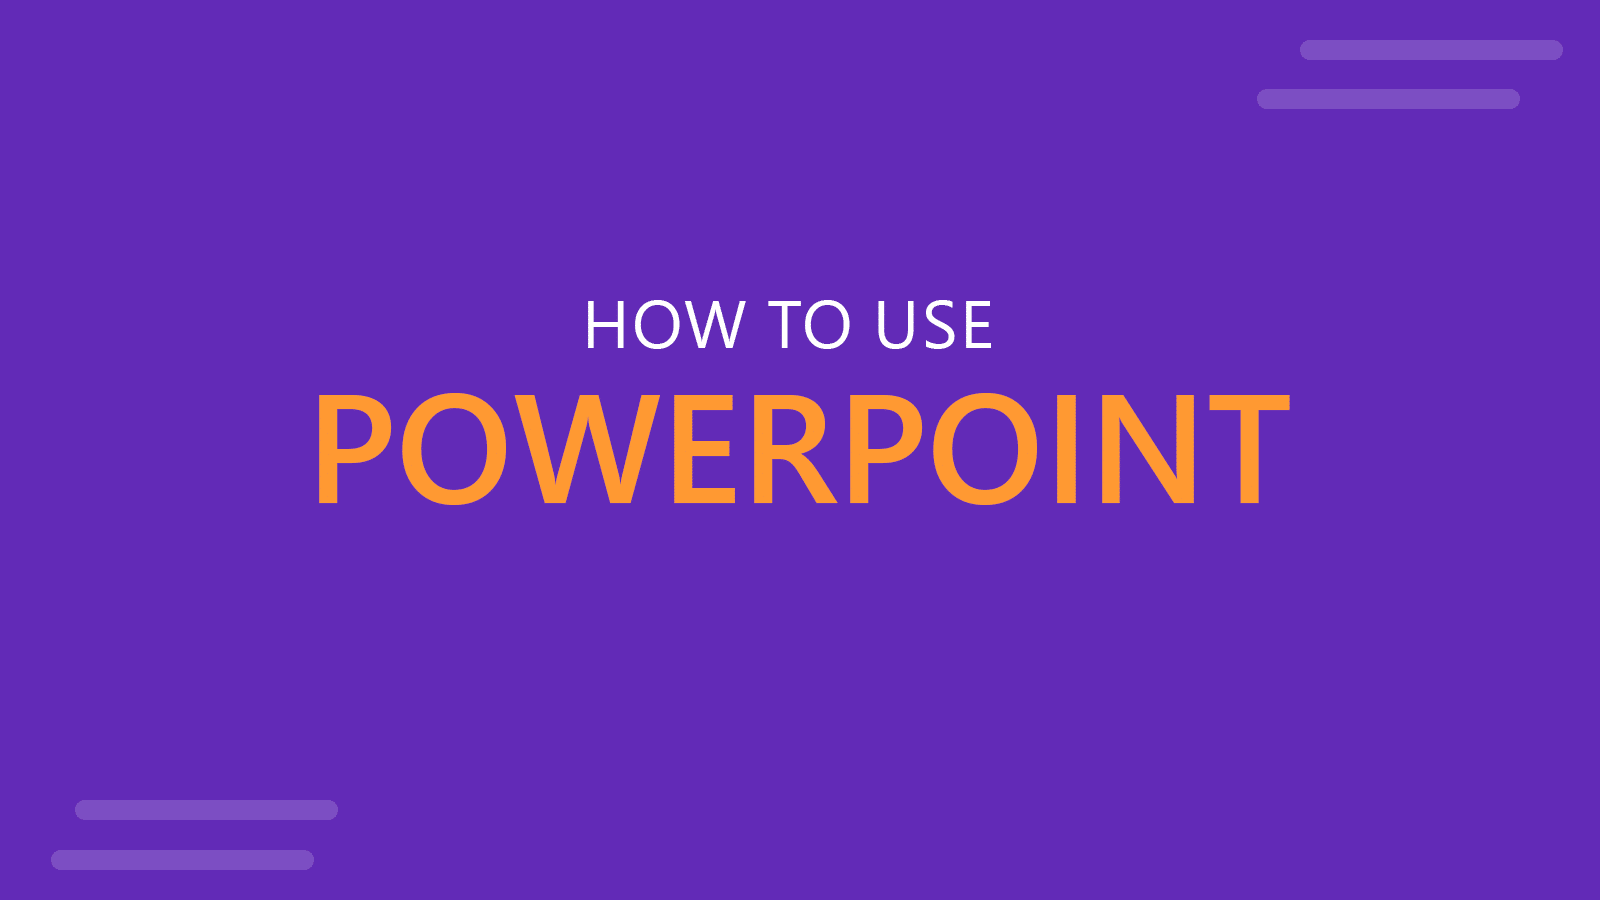 How to Use PowerPoint: A Complete Guide for Effective Presentations